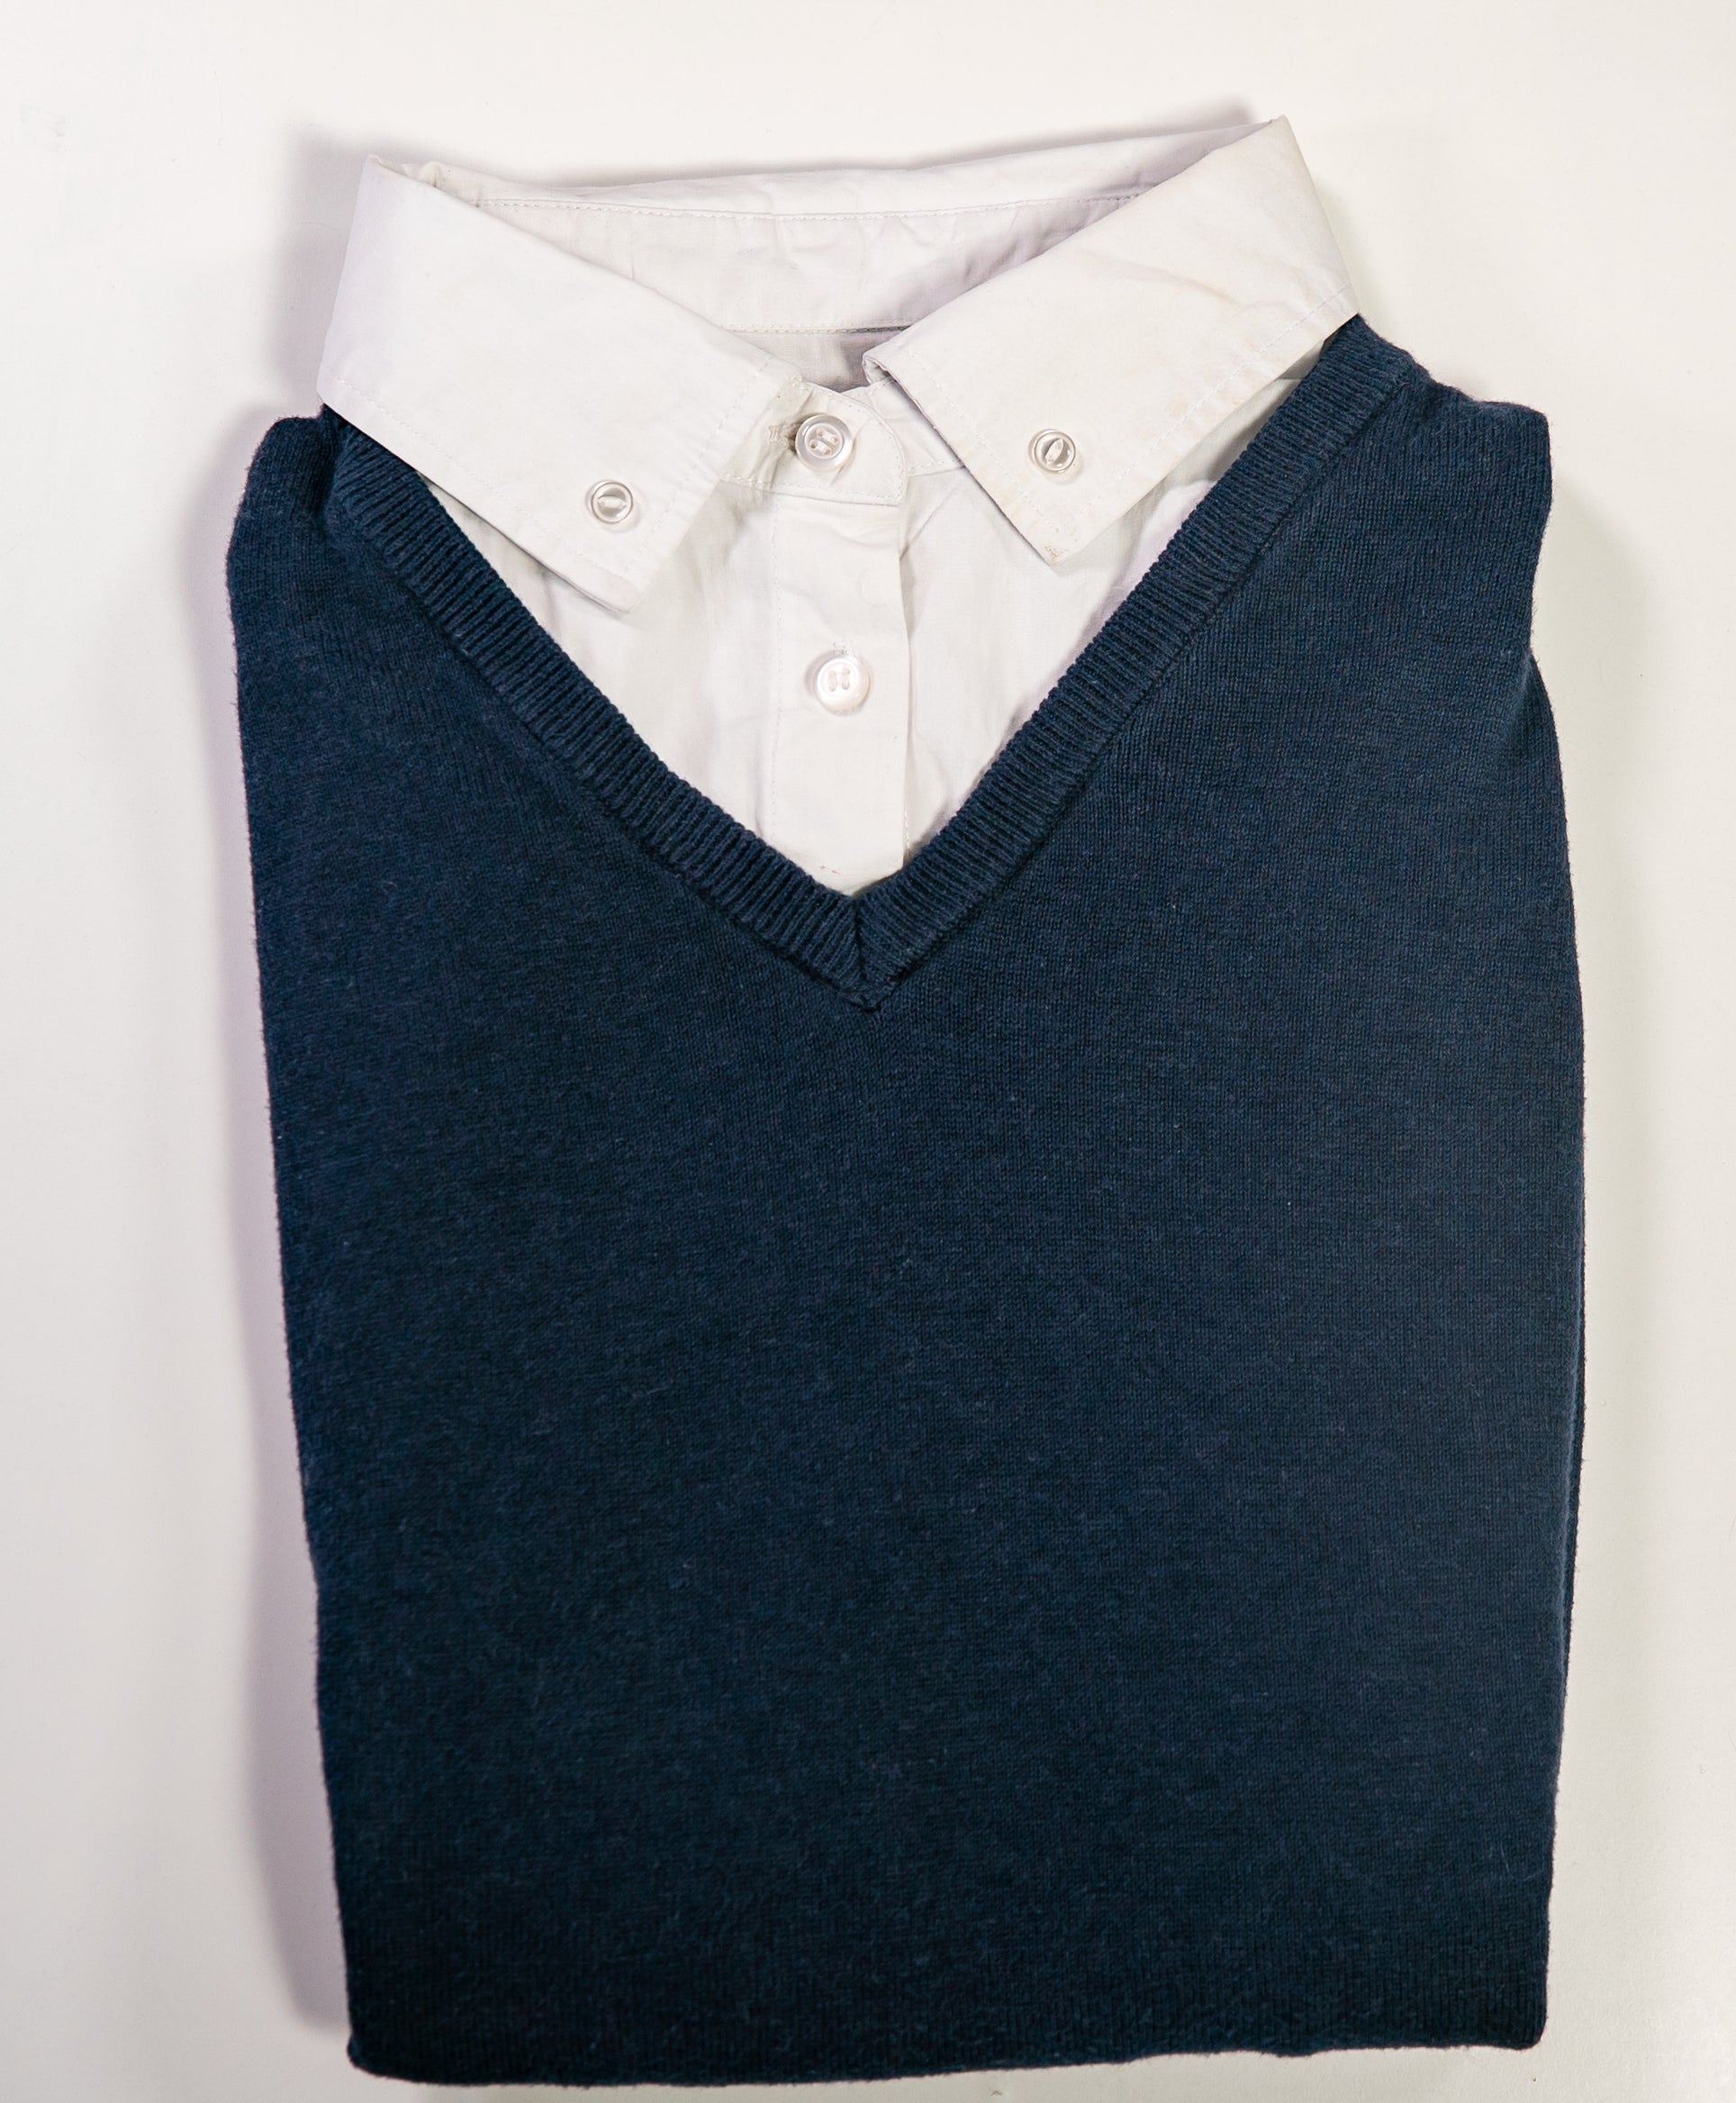 Navy Blue Sweater with White Collared Shirt